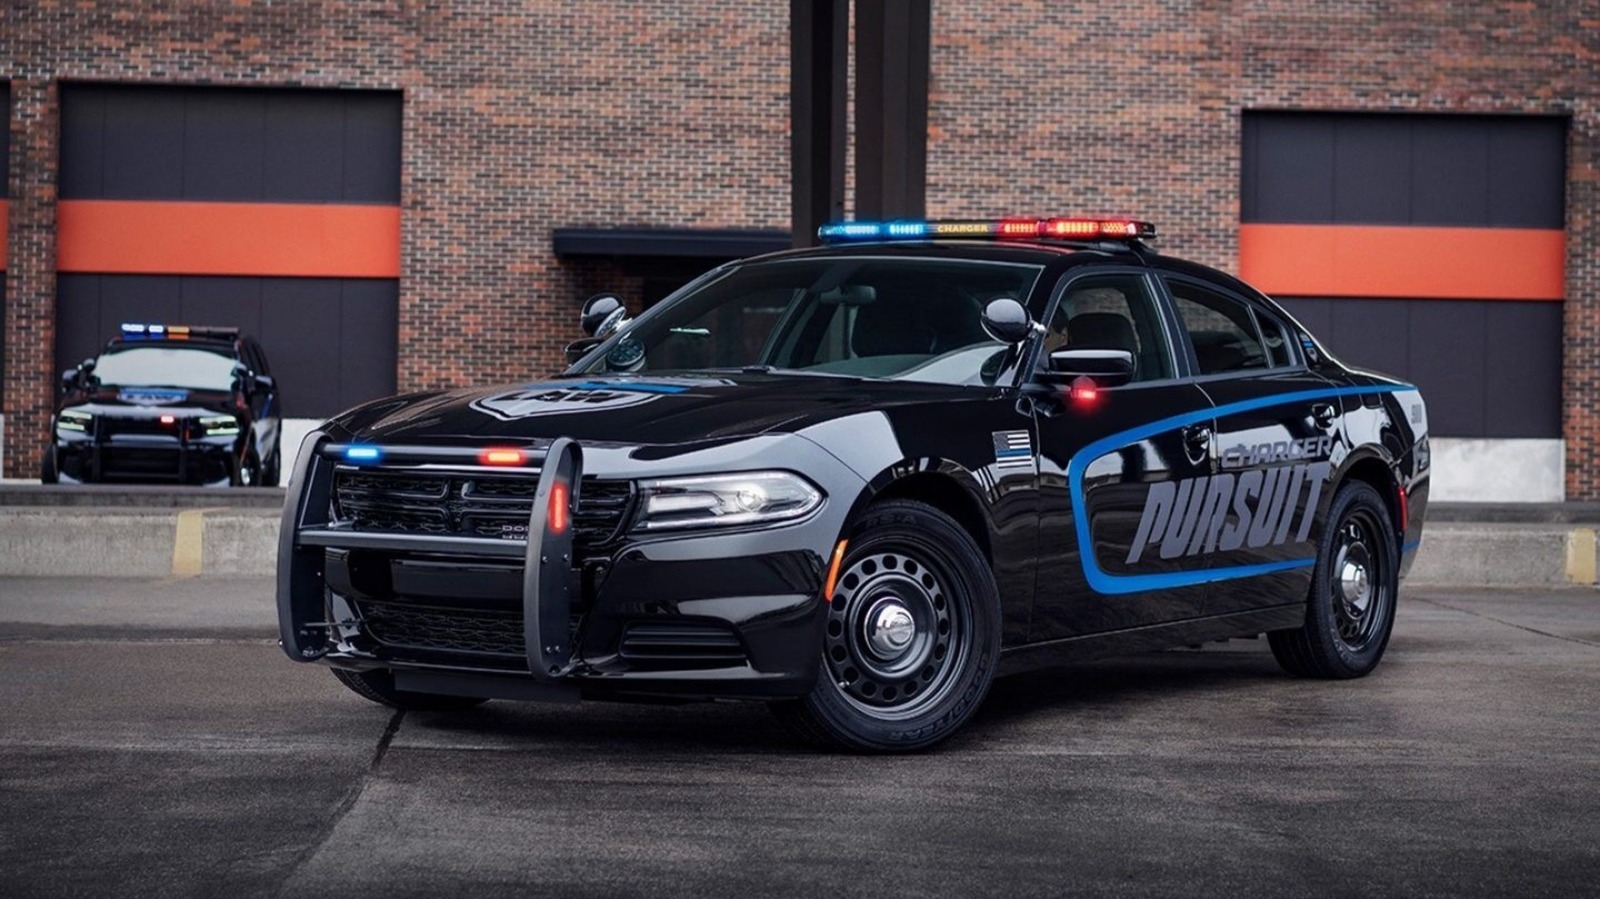 Dodge Charger Pursuit: What Makes This Police Car So Special?